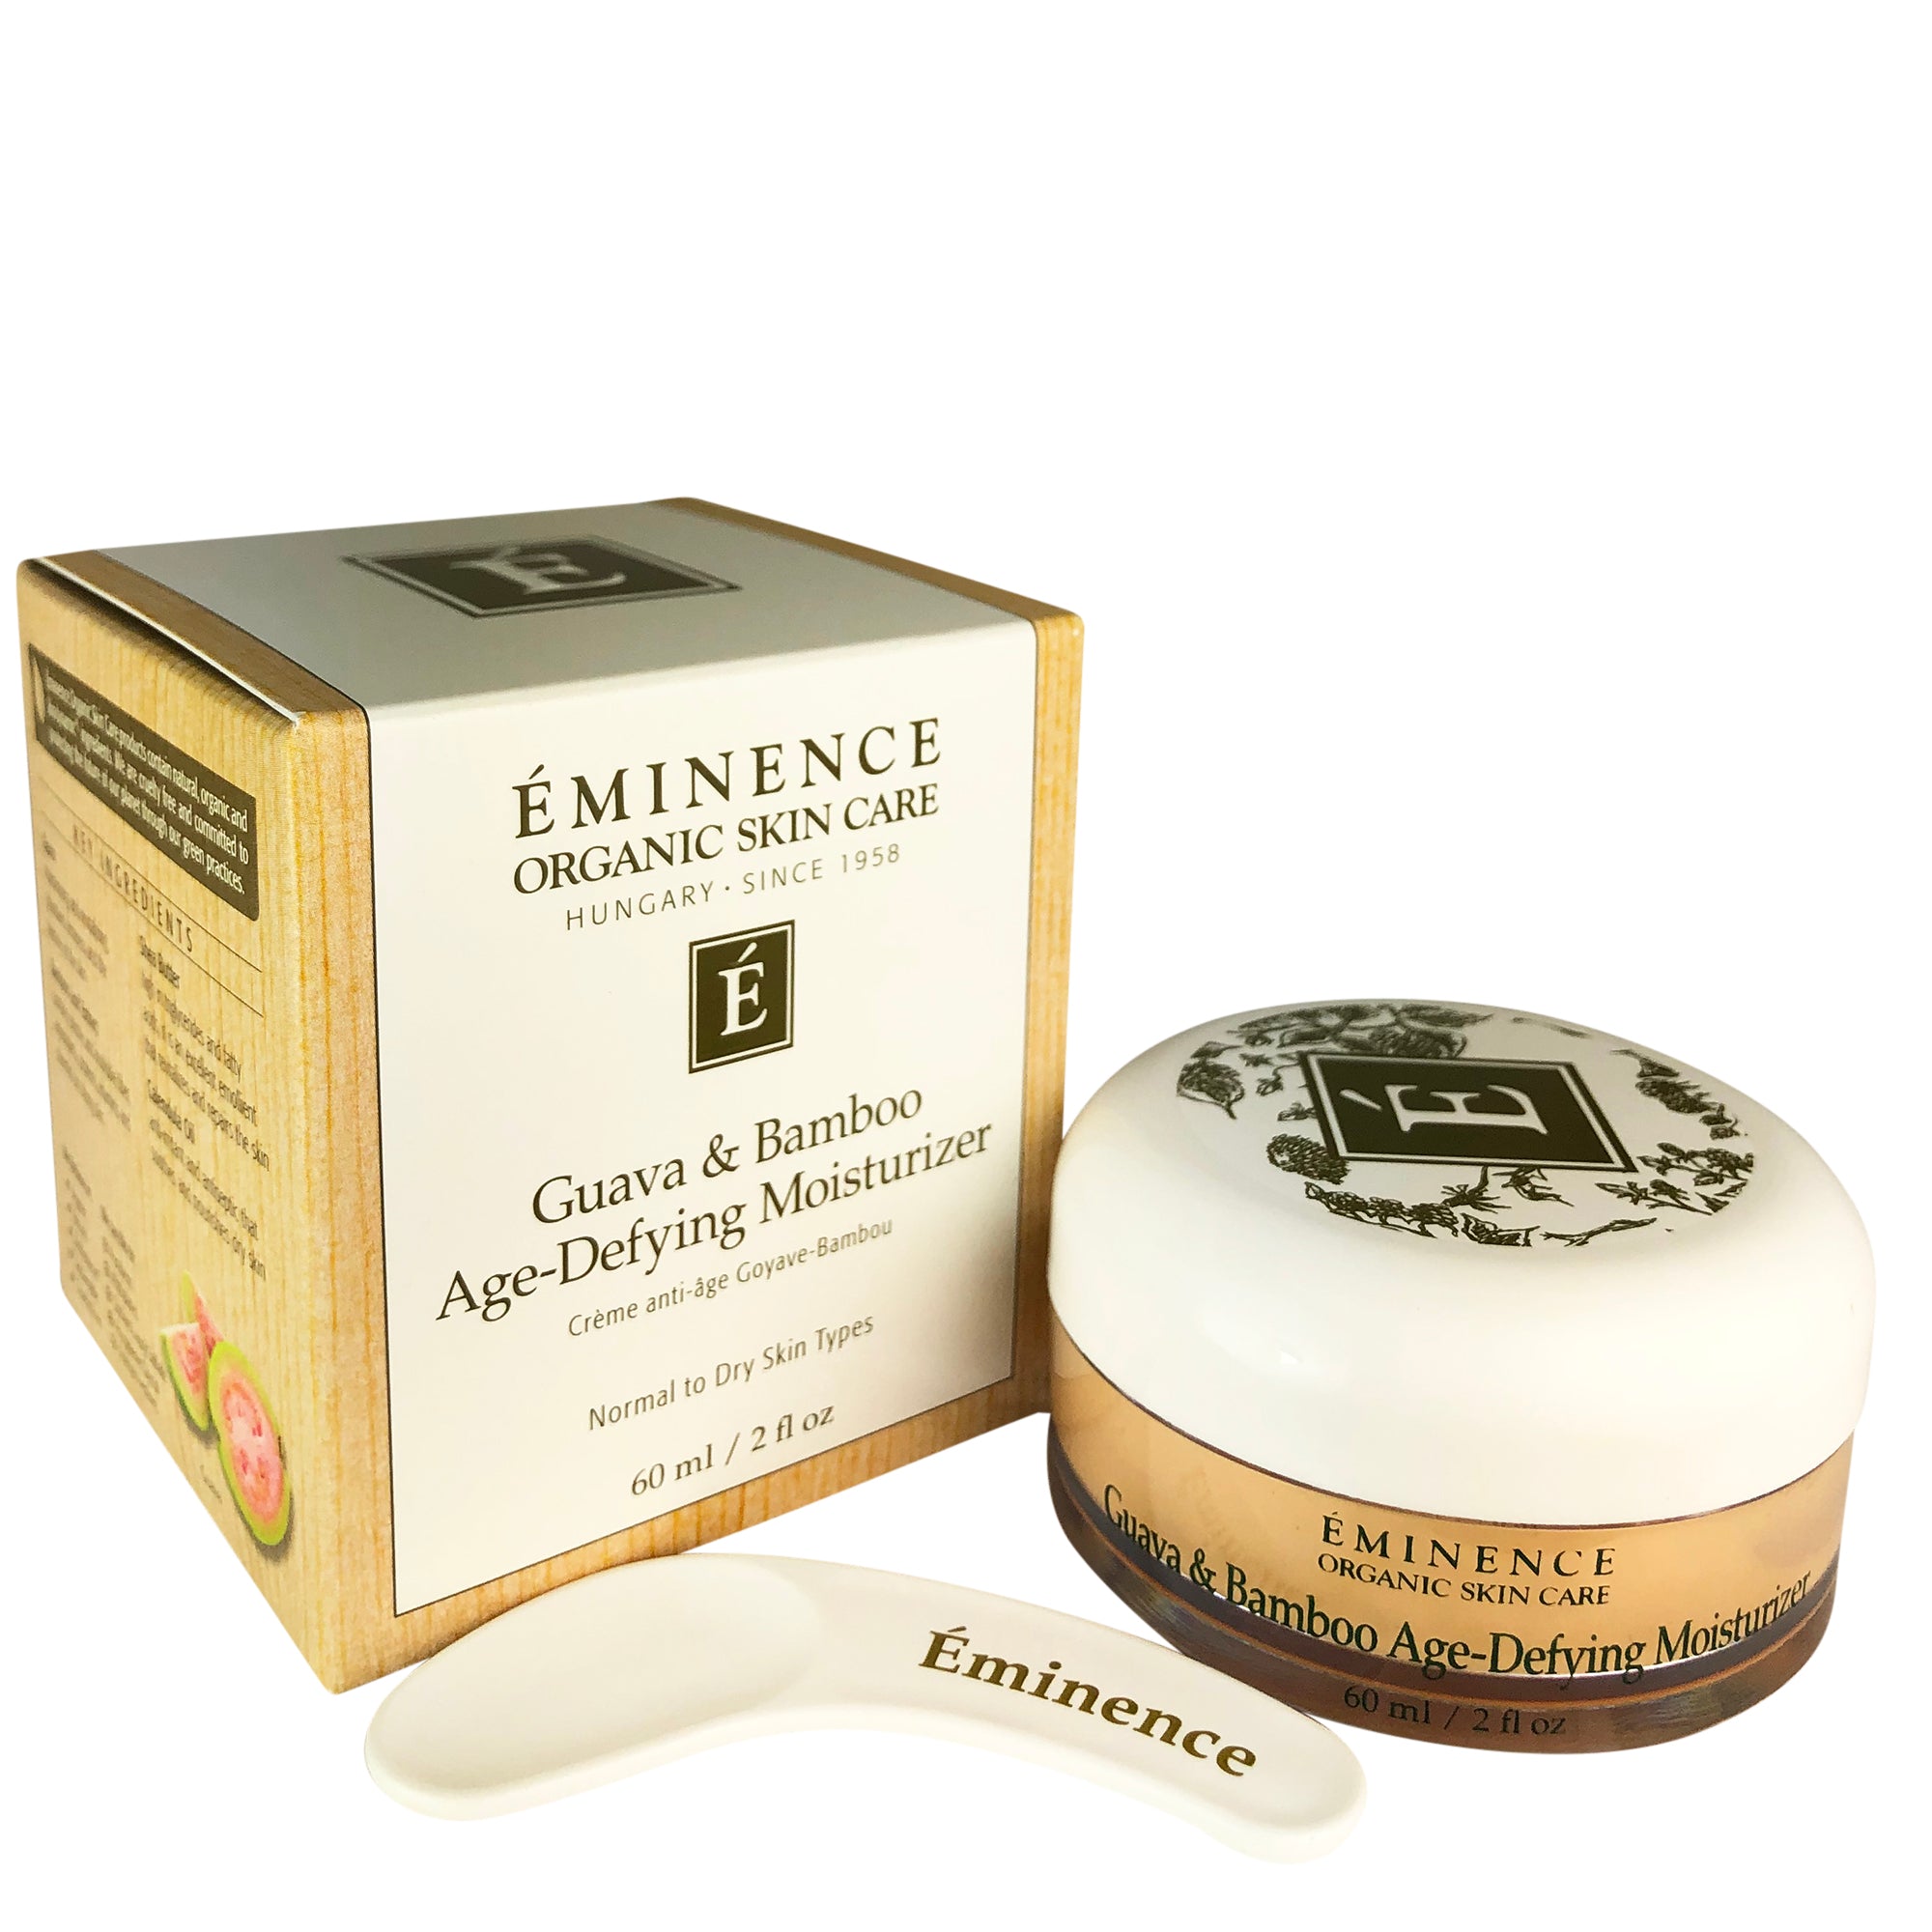 Eminence Guava & Bamboo Age Defying Face Moisturizer 2 oz For Normal To Dry Skin Types